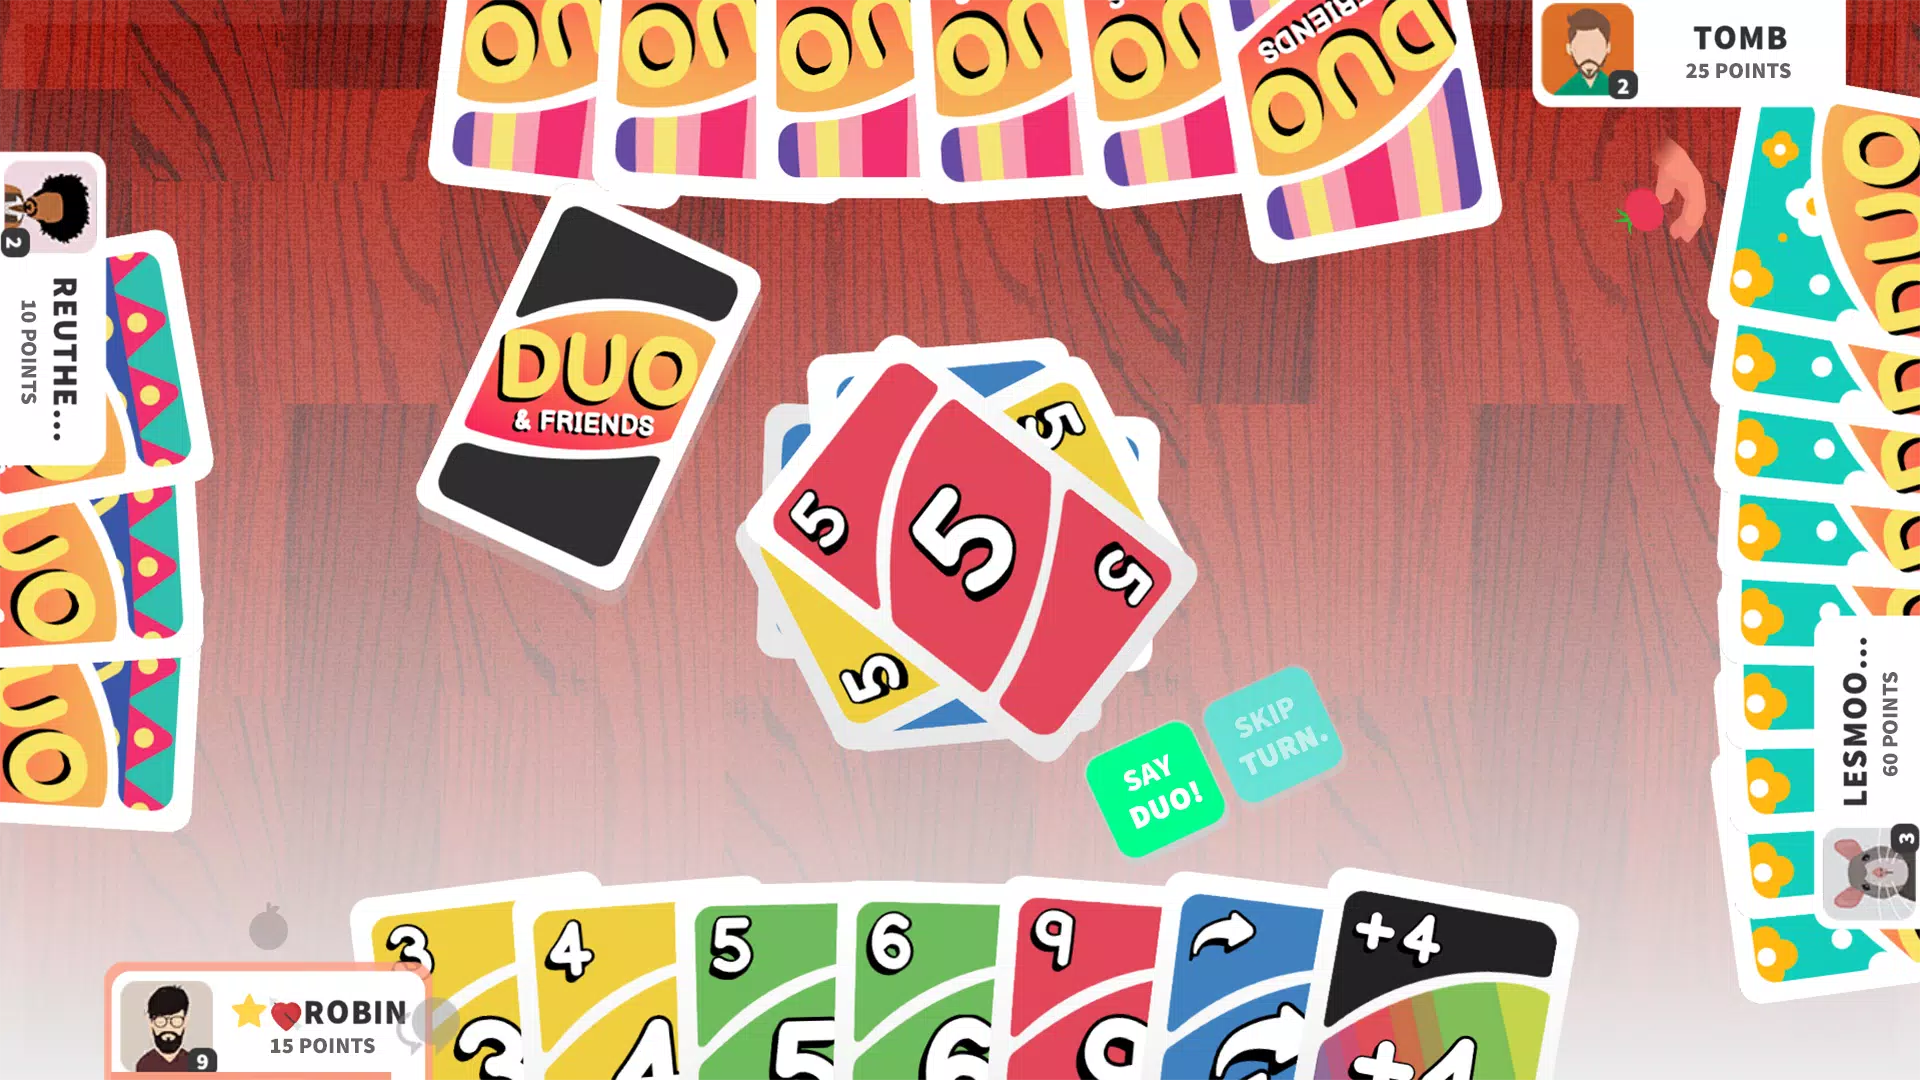 card party - UNO with friends online card games 